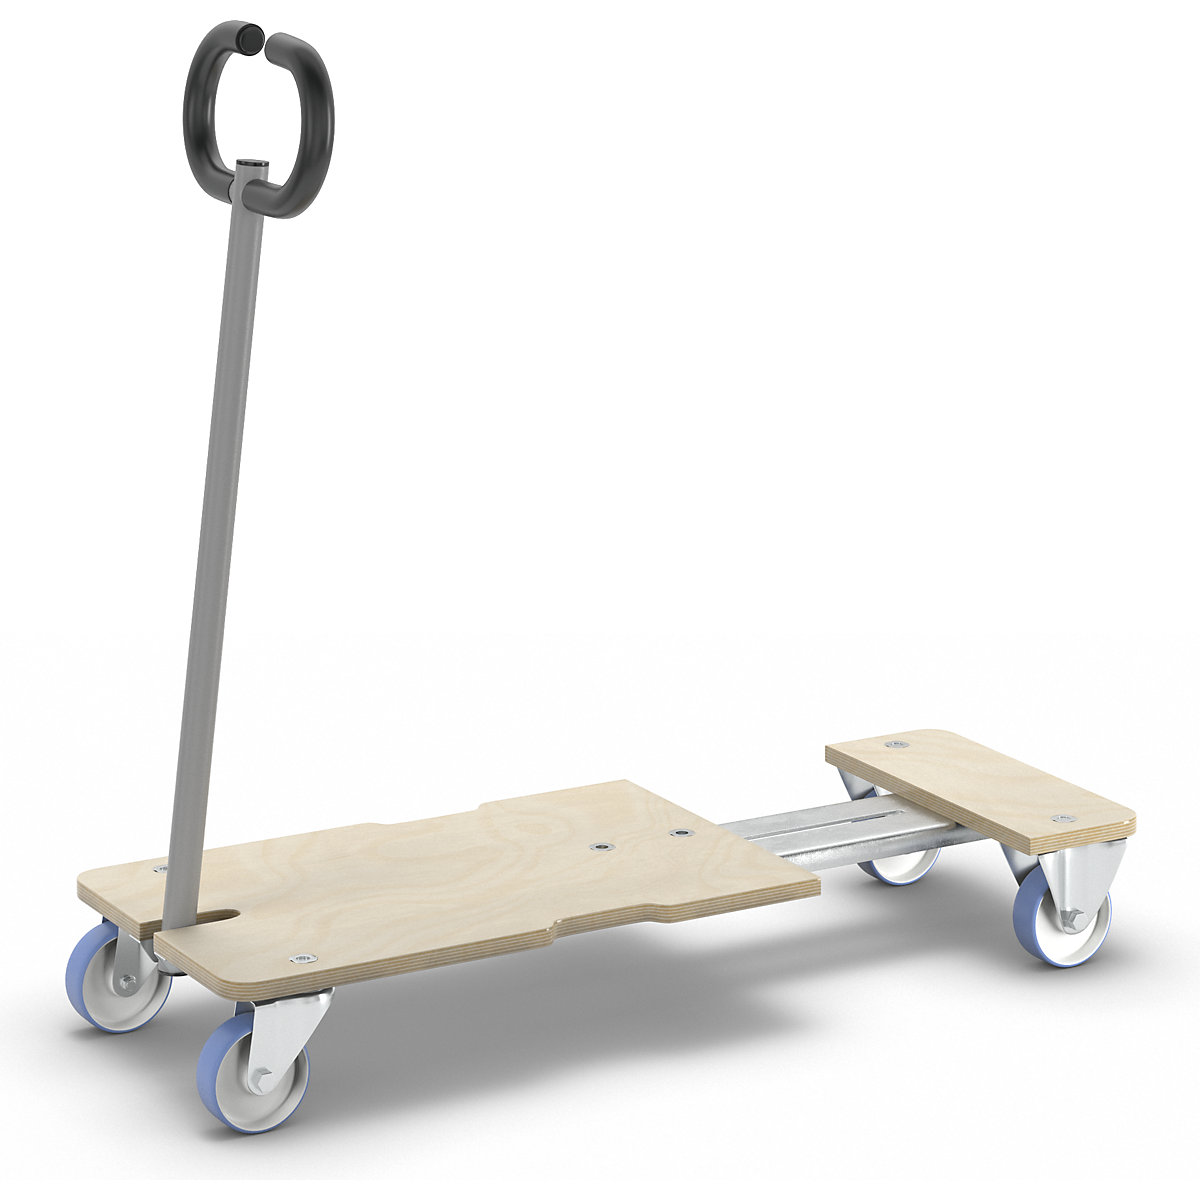 STAR CARRIER EXTENDABLE transport dolly - Wagner